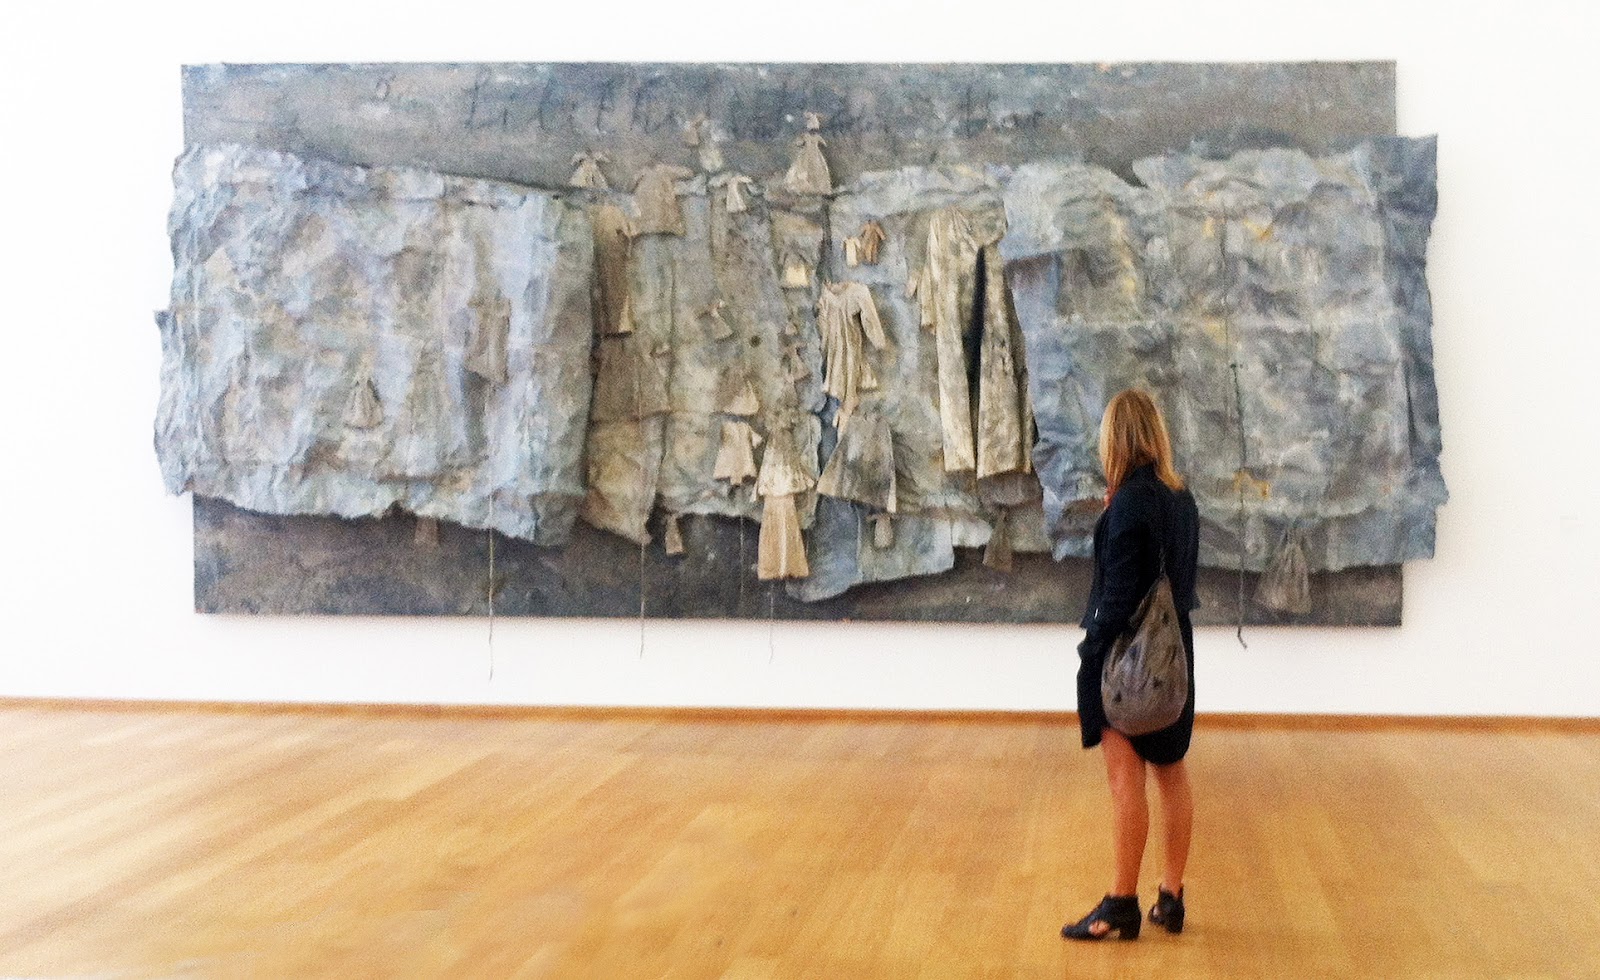 Mottled grey fabric and clothing drape across each other on a museum wall. 